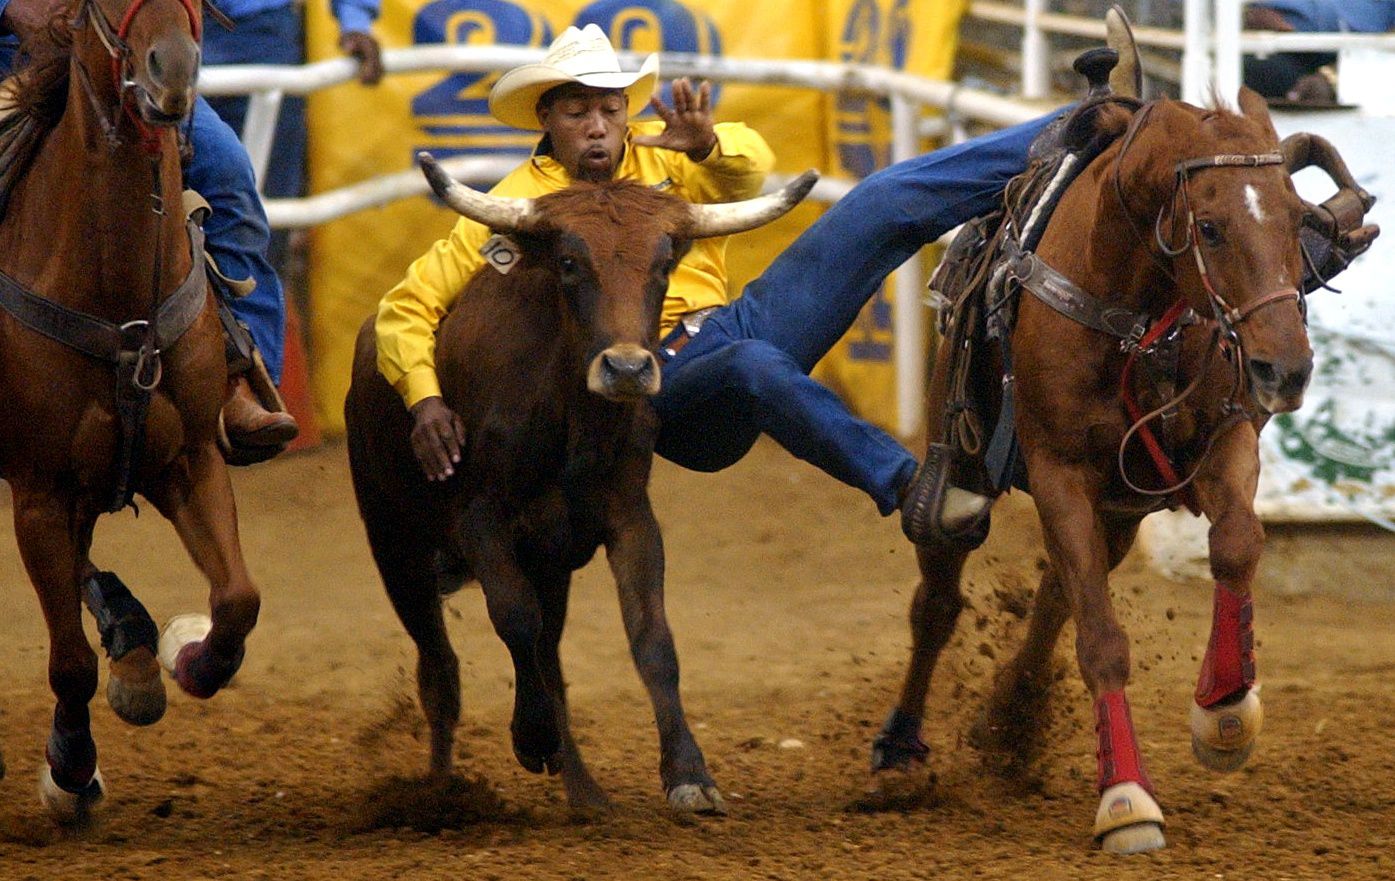 Steer wrestling is one of the rodeo events happening this weekend during Cowboys of Color in Mesquite.